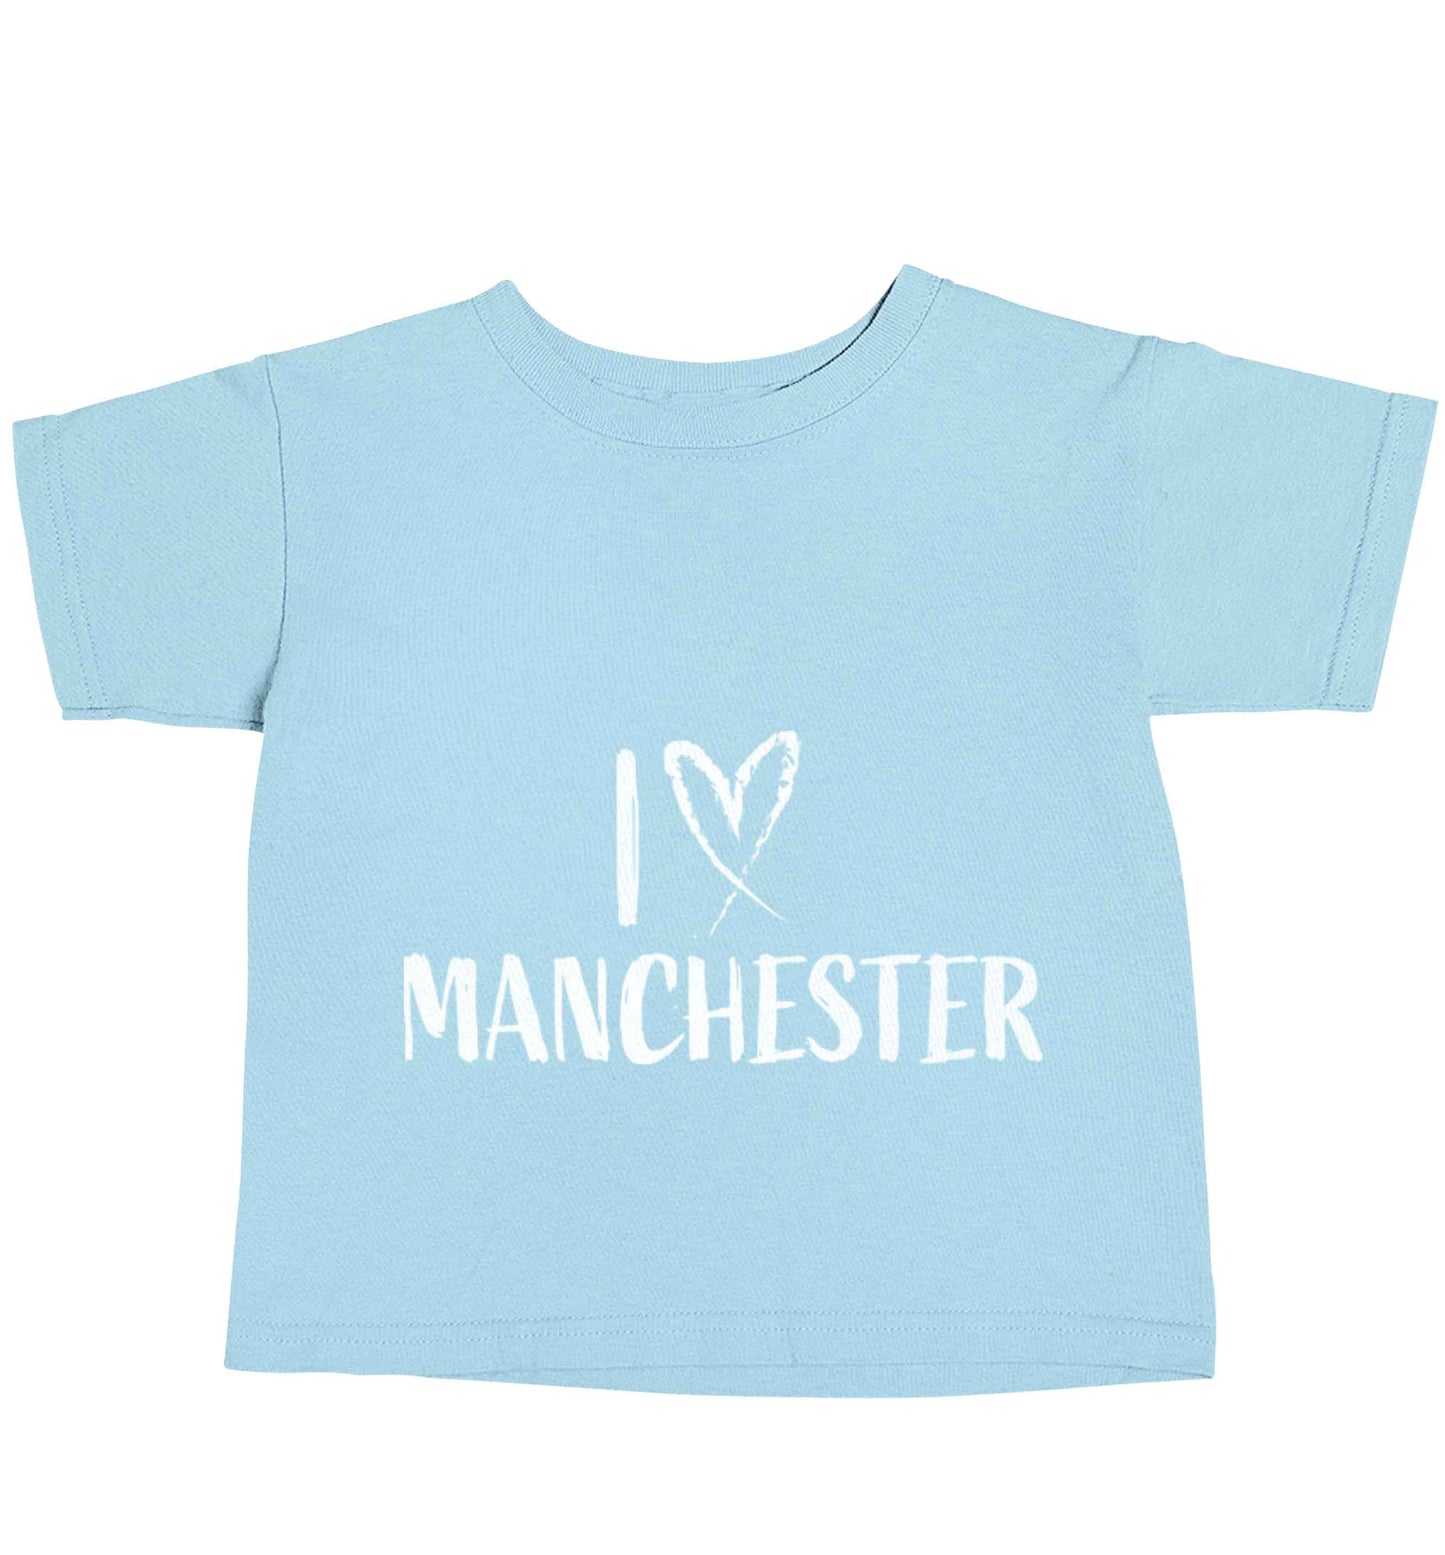 I love Manchester light blue baby toddler Tshirt 2 Years